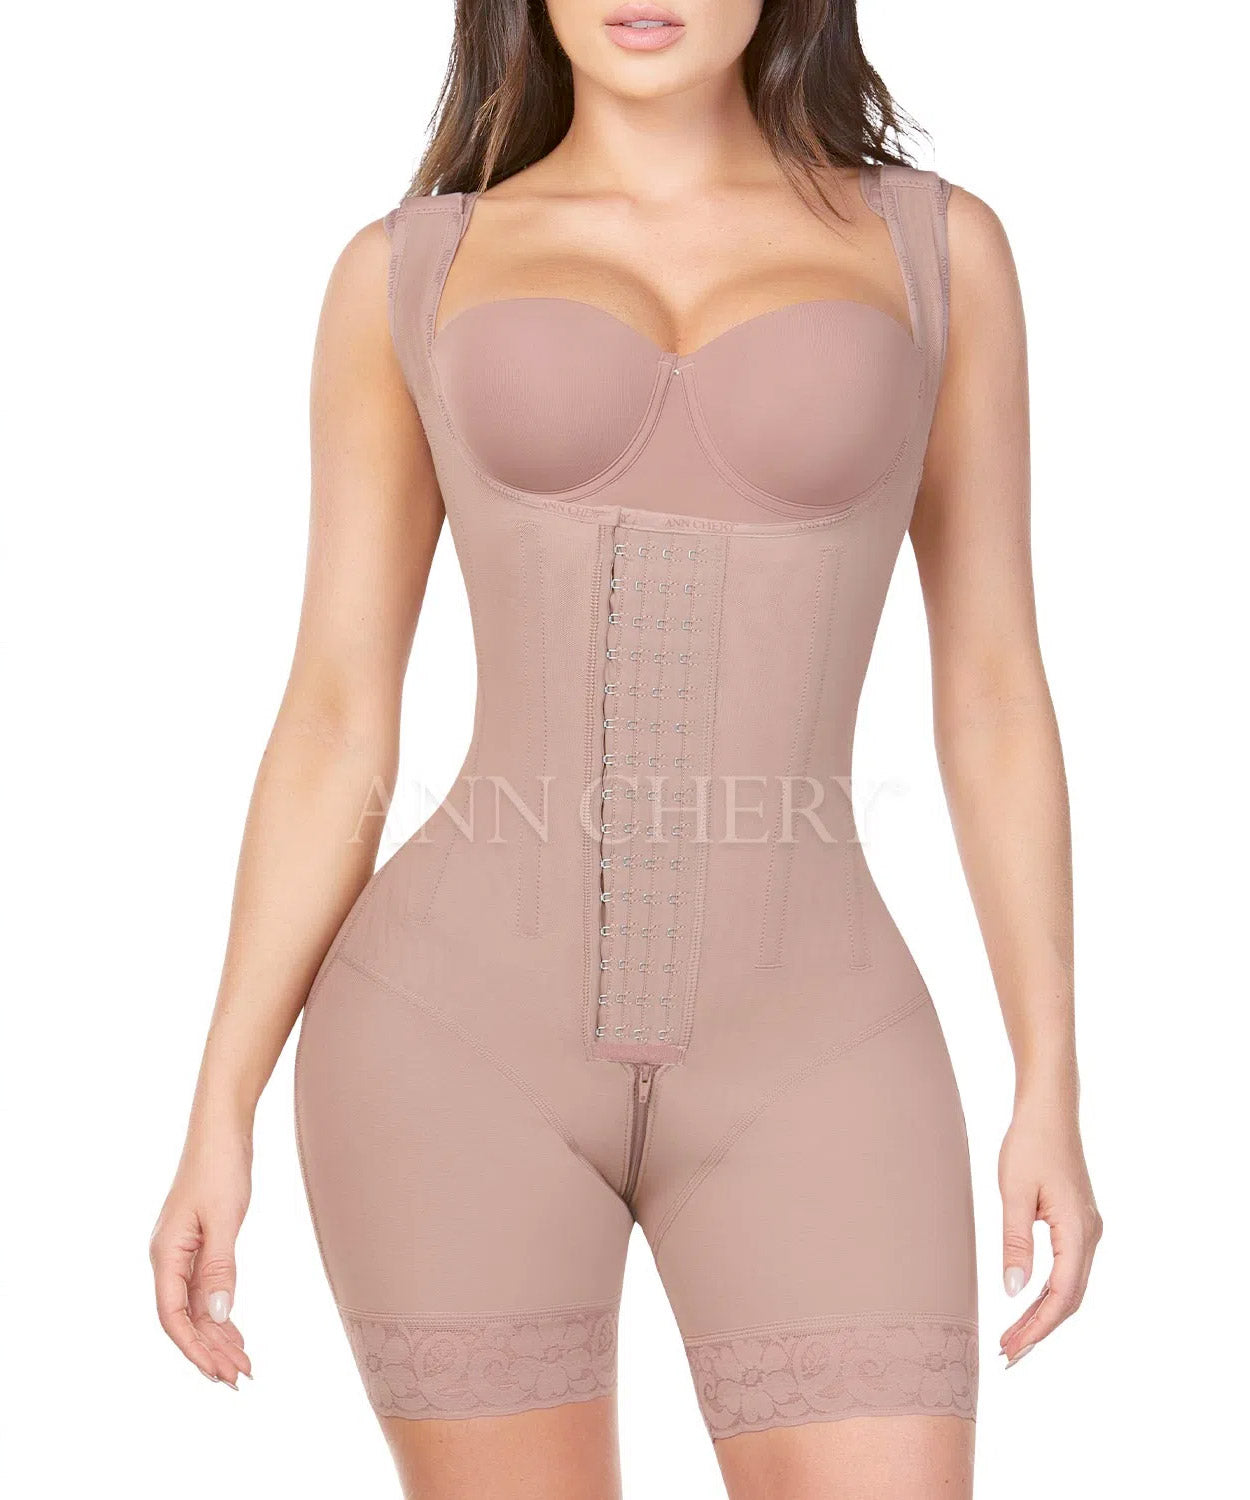 Short Girdle with 4 Hourglass Clasps 5165 by Ann Chery® –